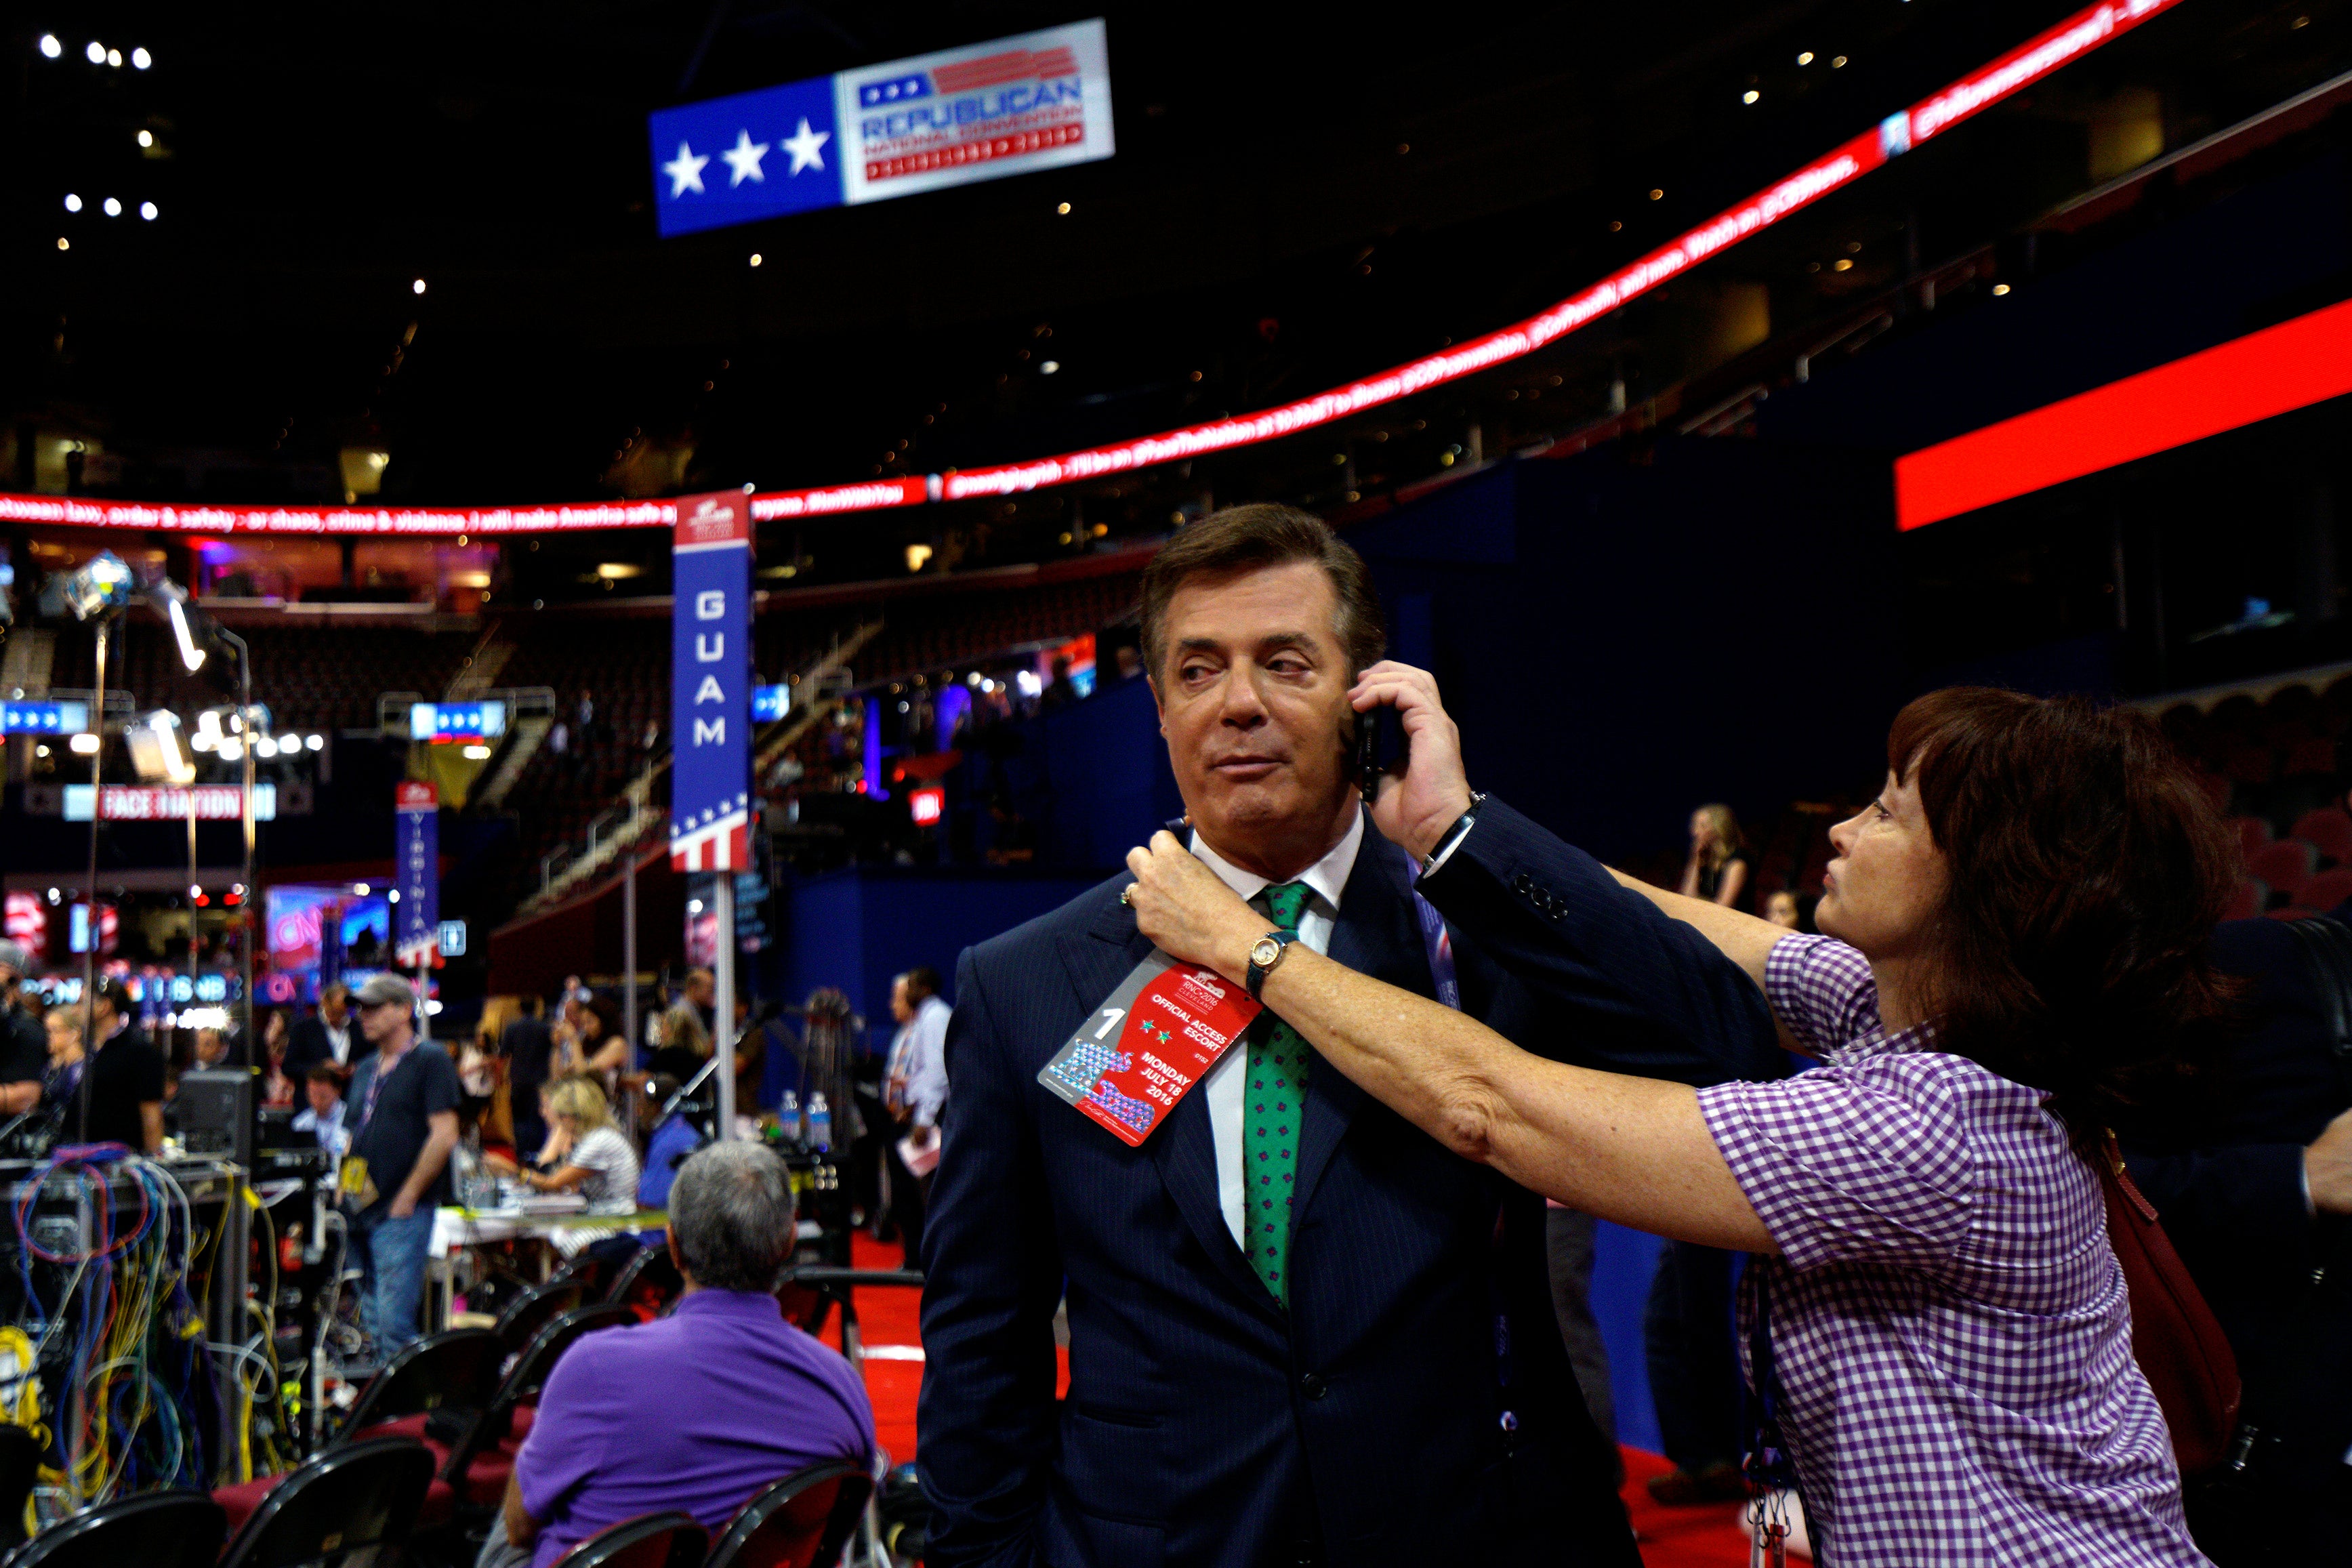 Manafort holds a cell phone to his ear as a credential is placed around his neck while he stands on the convention floor.